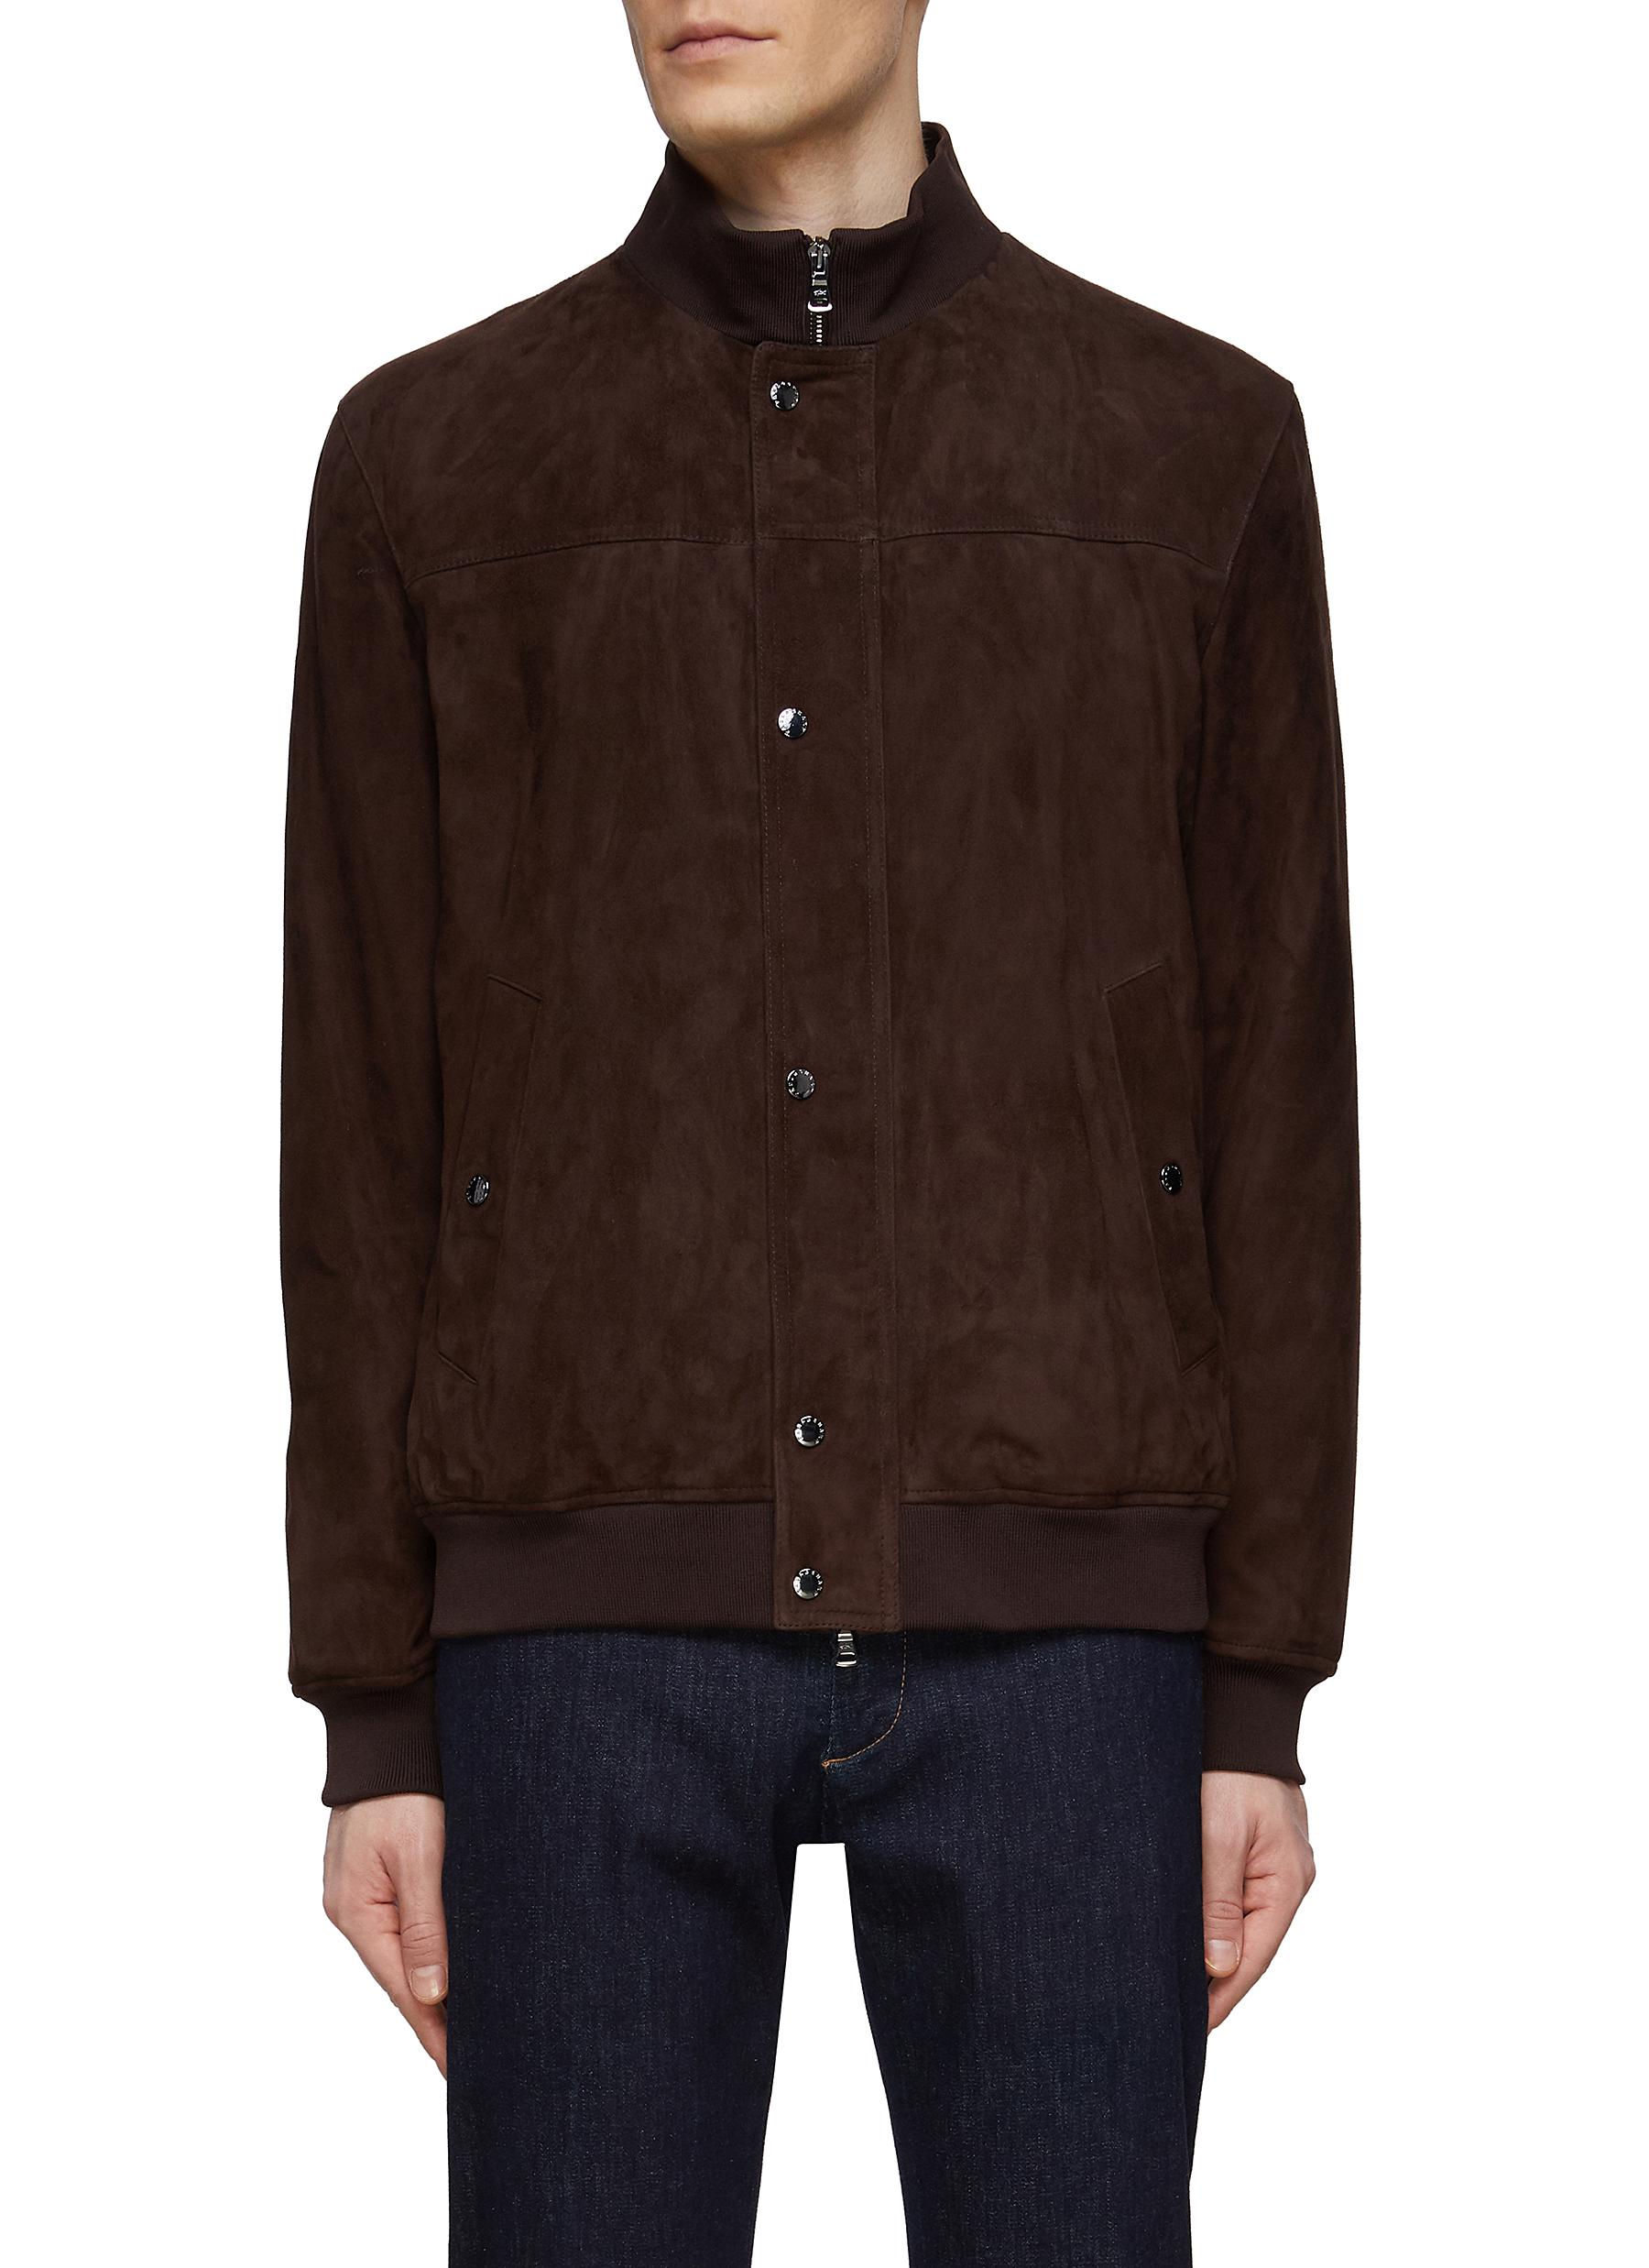 Paul & Shark Aqualeather Lamb Suede Leather Bomber Jacket In Brown ...